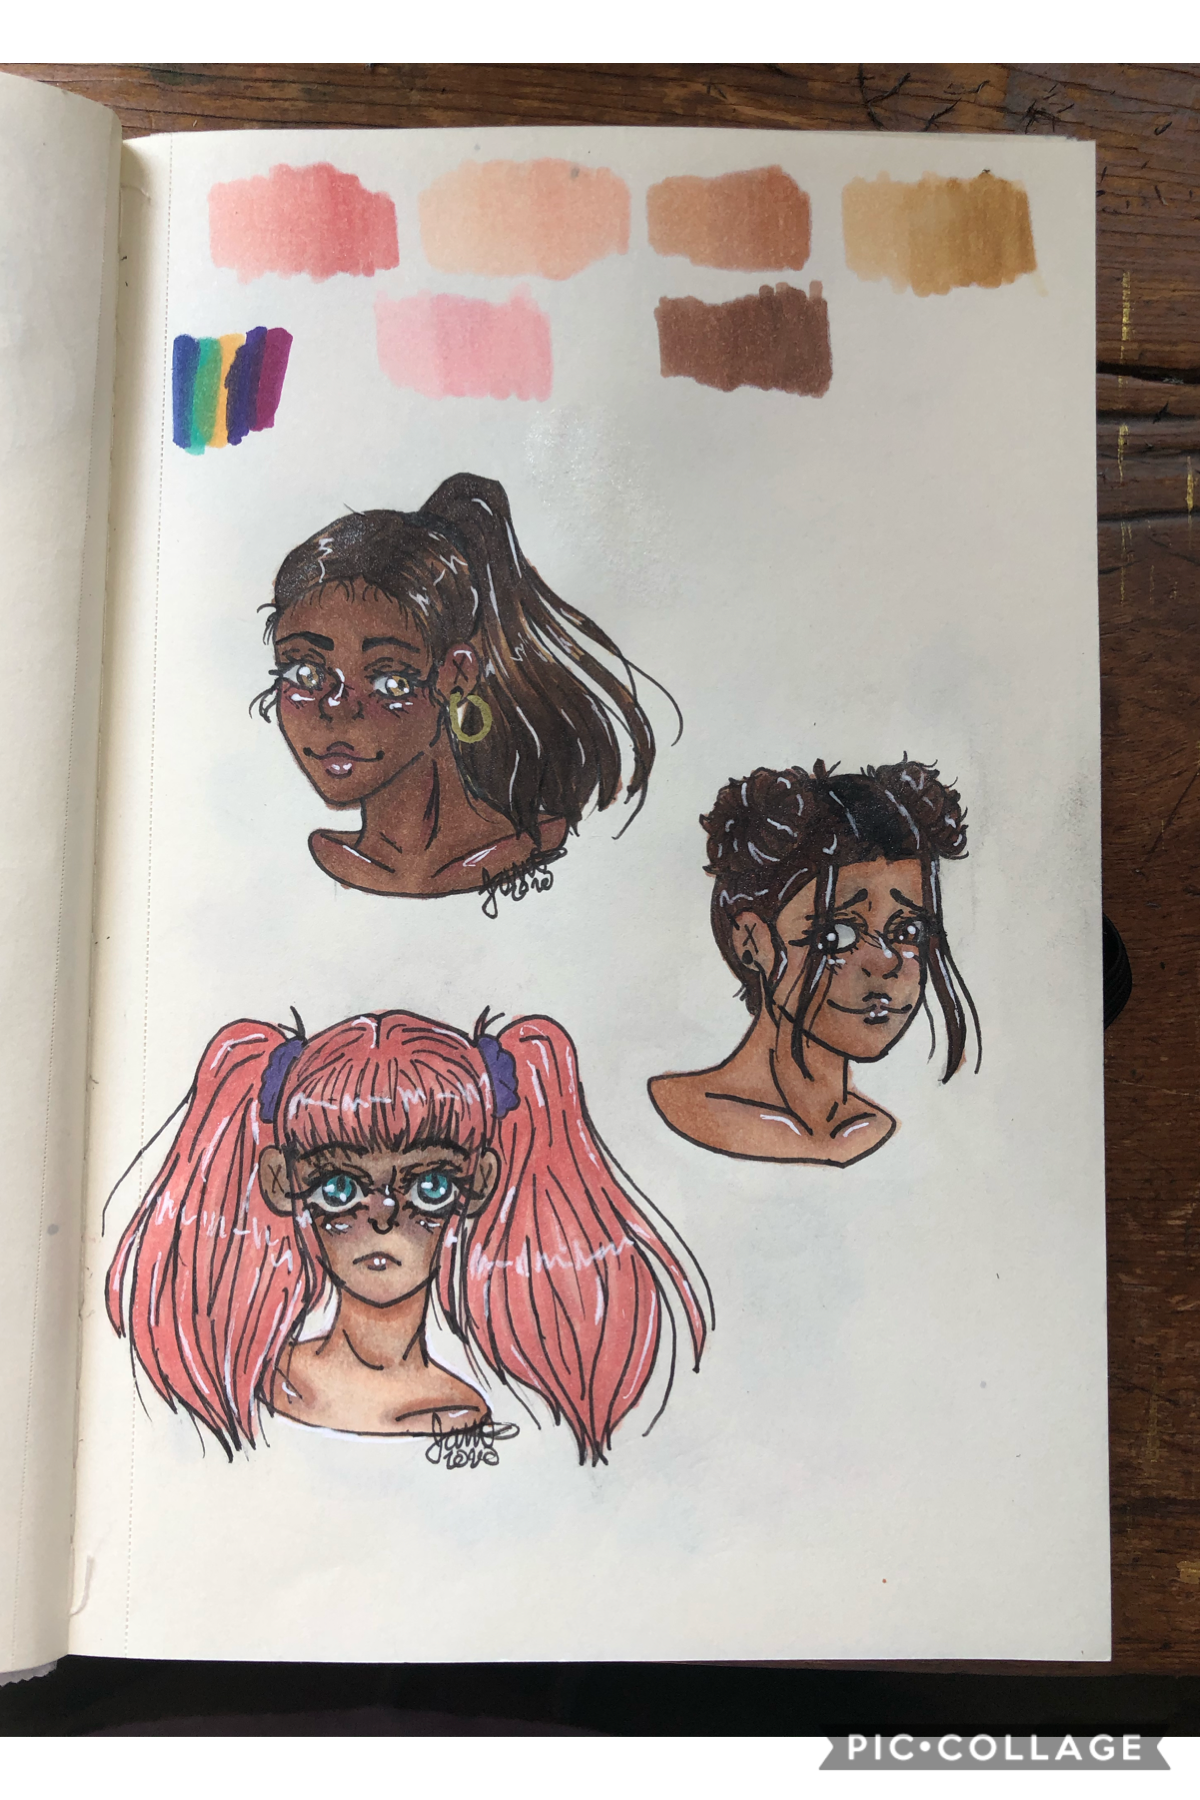 So I got a set of triblend spectrum noir Markers for my bday and decided to test them out with this. They blend really well and are a good substitute for copics. 9.5/10